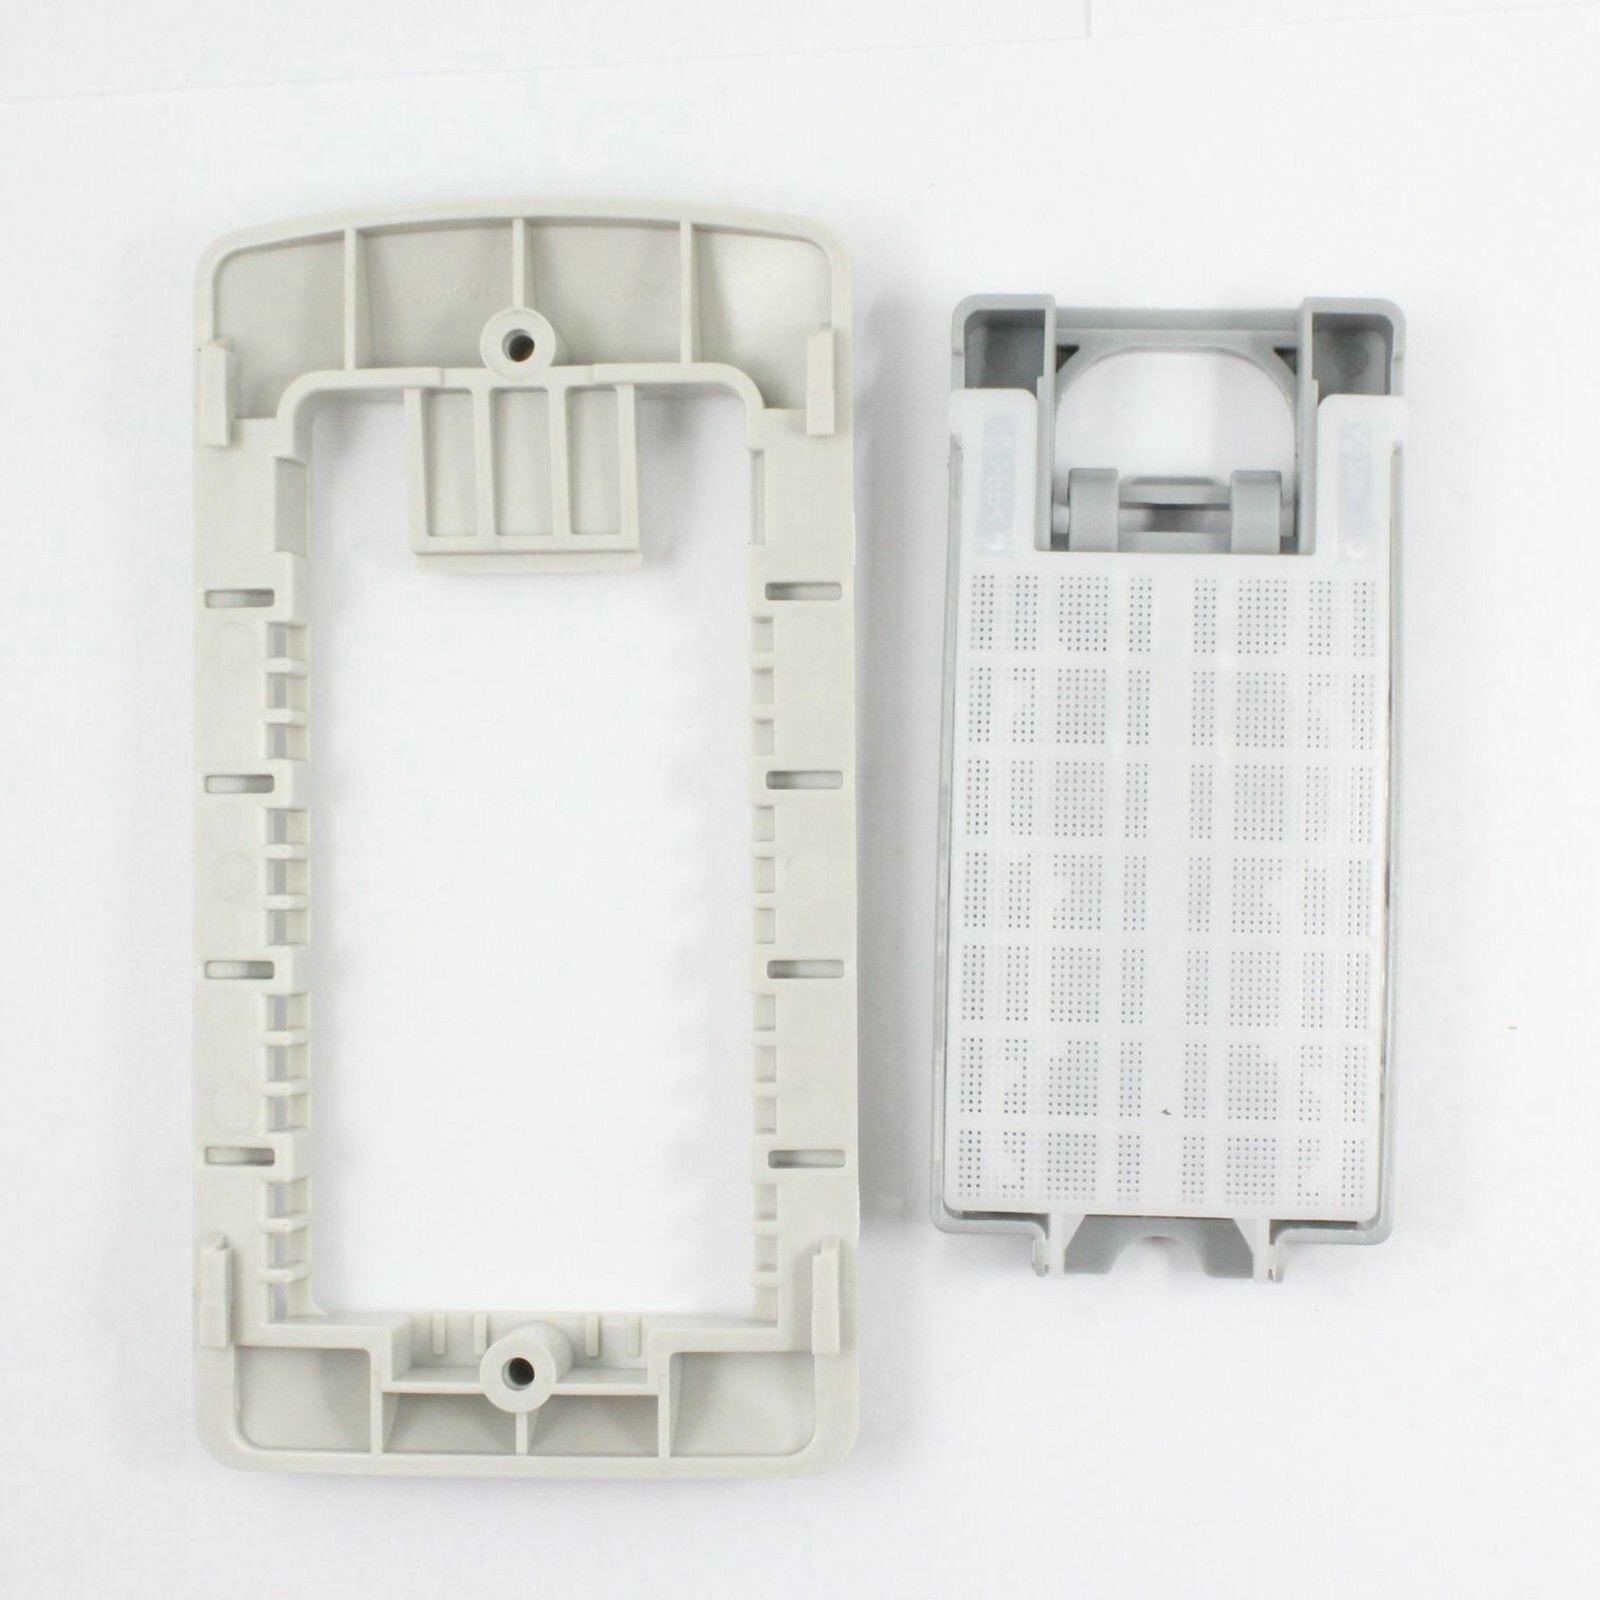 Washing Machine Lint Filter Assembly Mesh For LG WT-H9556 WT-R107 WT-R807 Sparesbarn